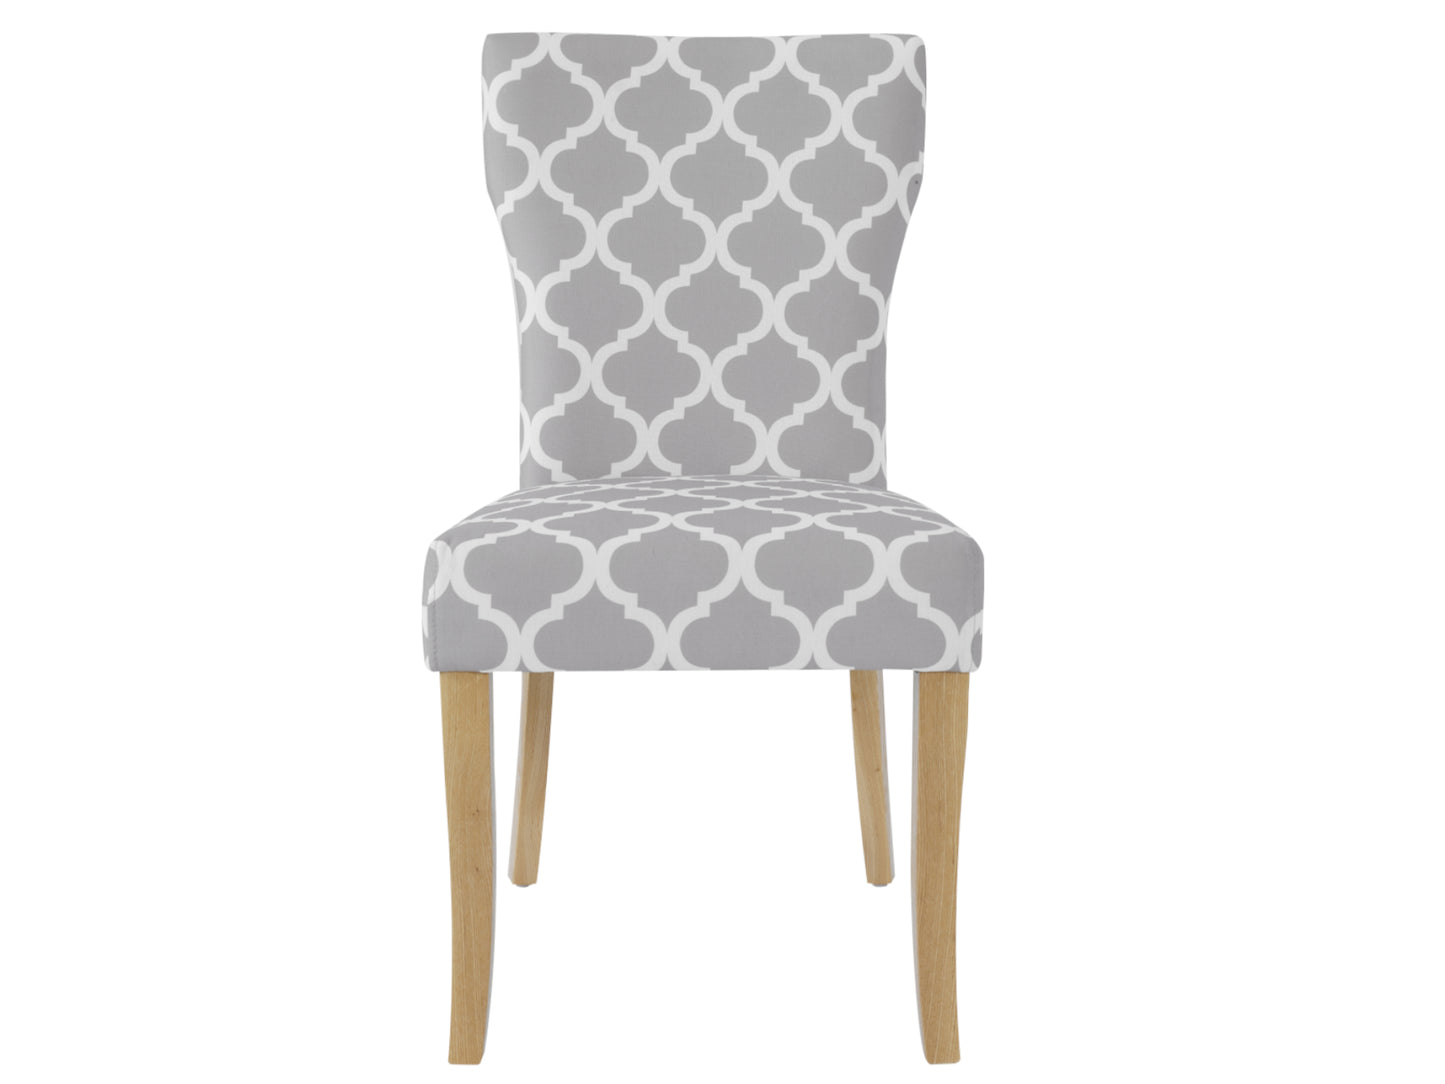 Hugo Patterned Dining Chair (2 Pack)